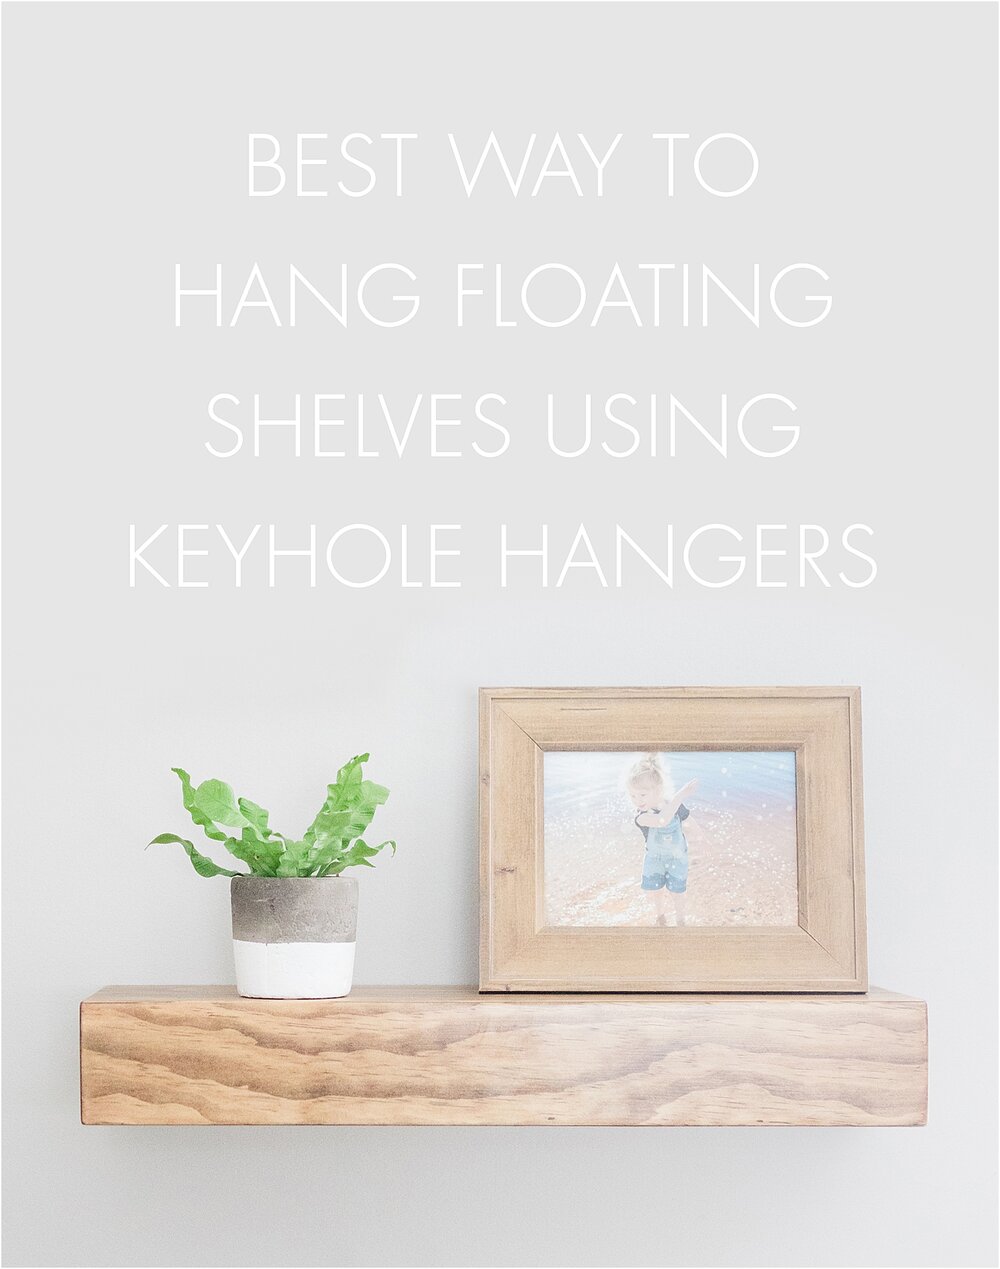 How To Hang Floating Shelves With, Can You Hang Floating Shelves On Drywall